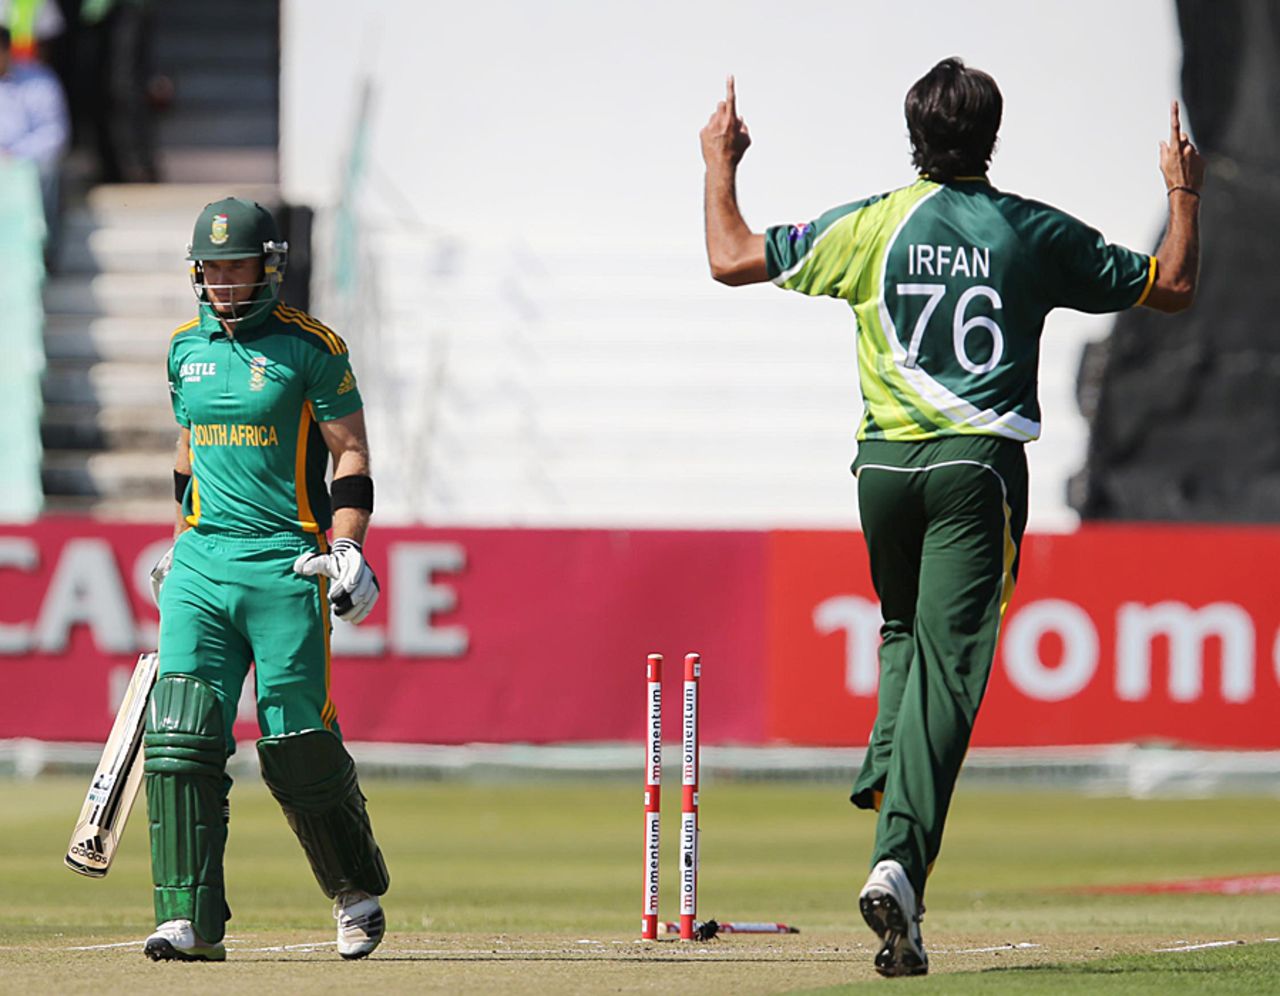 Mohammad Irfan celebrates after his second wicket in two balls, South Africa v Pakistan, 4th ODI, Durban, March 21, 2013